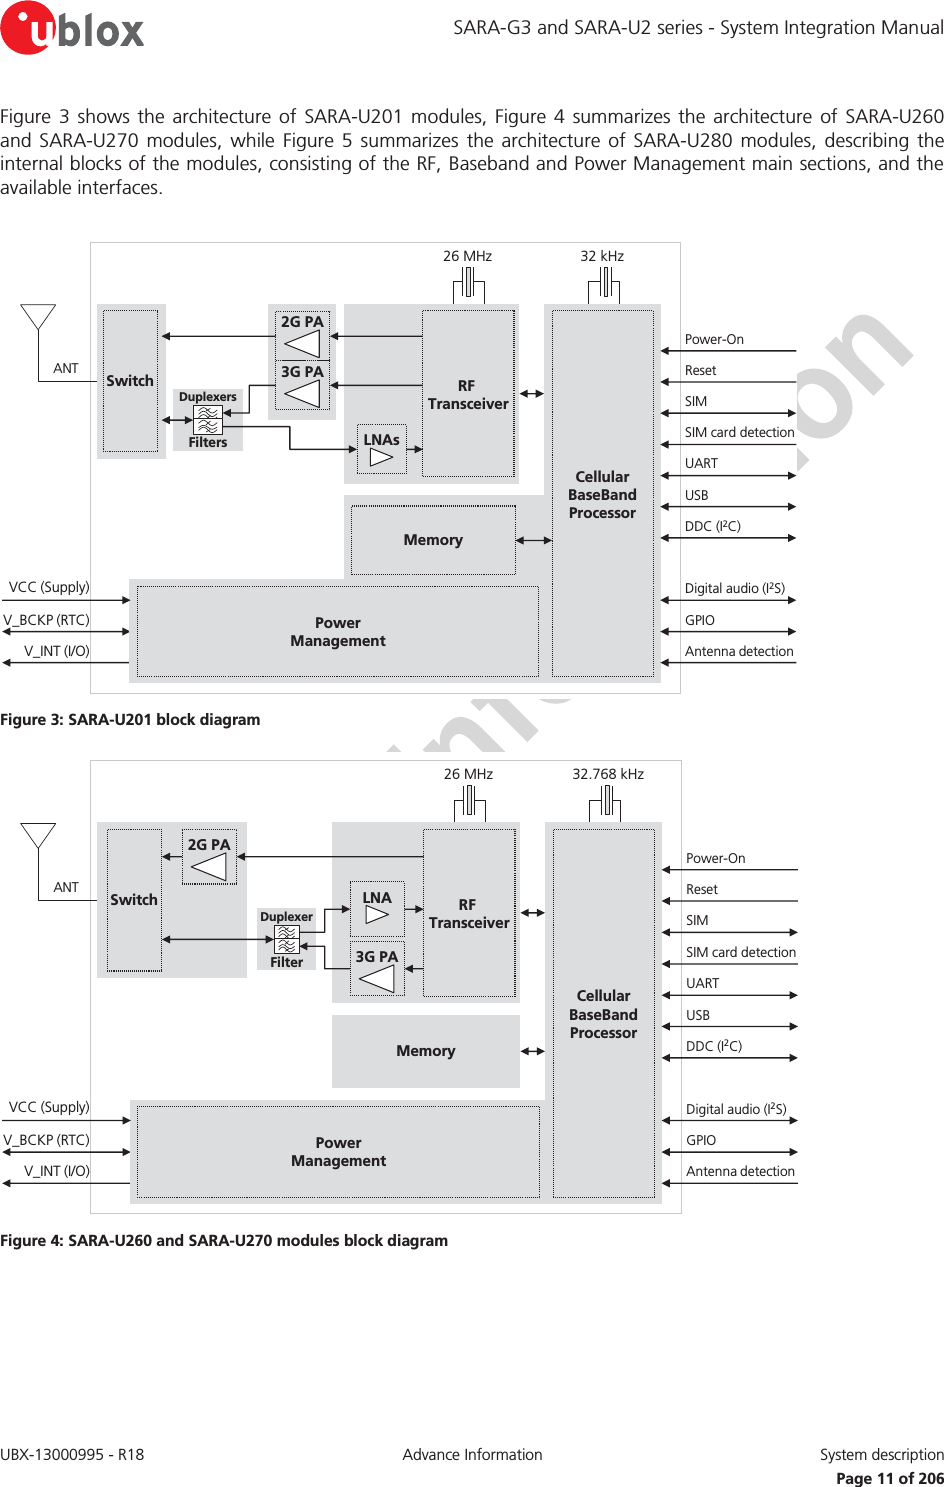 SARA-G3 and SARA-U2 series - System Integration Manual UBX-13000995 - R18  Advance Information  System description   Page 11 of 206 Figure 3 shows the architecture of SARA-U201 modules, Figure 4 summarizes the architecture of SARA-U260 and SARA-U270 modules, while Figure 5 summarizes the architecture of SARA-U280 modules, describing the internal blocks of the modules, consisting of the RF, Baseband and Power Management main sections, and the available interfaces.  MemoryV_BCKP (RTC)V_INT (I/O)RF TransceiverPowerManagementCellularBaseBandProcessorANTVCC (Supply)USBDDC (I2C)SIM card detectionSIMUARTPower-OnResetDigital audio (I2S)GPIOAntenna detection26 MHzDuplexersFiltersSwitch2G PA32 kHzLNAs3G PA Figure 3: SARA-U201 block diagram MemoryV_BCKP (RTC)V_INT (I/O)RF TransceiverPowerManagementCellularBaseBandProcessorANTVCC (Supply)USBDDC (I2C)SIM card detectionSIMUARTPower-OnResetDigital audio (I2S)GPIOAntenna detection3G PA26 MHzDuplexerFilterSwitch2G PALNA32.768 kHz Figure 4: SARA-U260 and SARA-U270 modules block diagram 